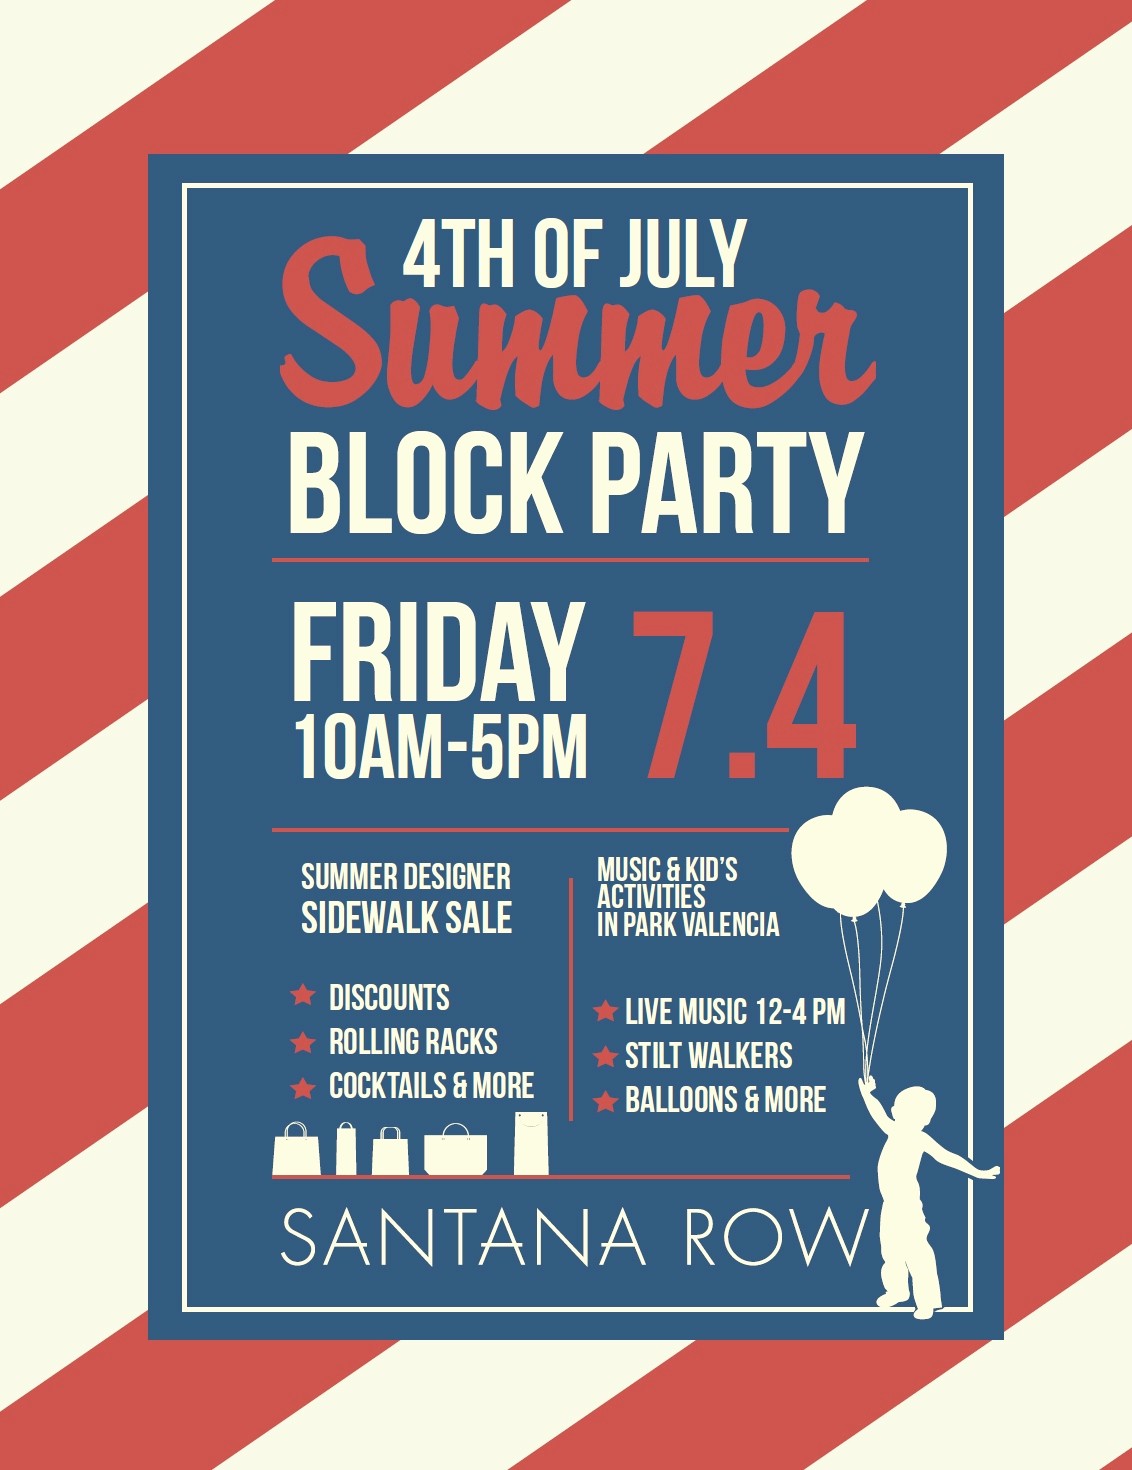 Free Block Party Flyer Template Lovely Block Party Flyer Template Gallery Professional Report